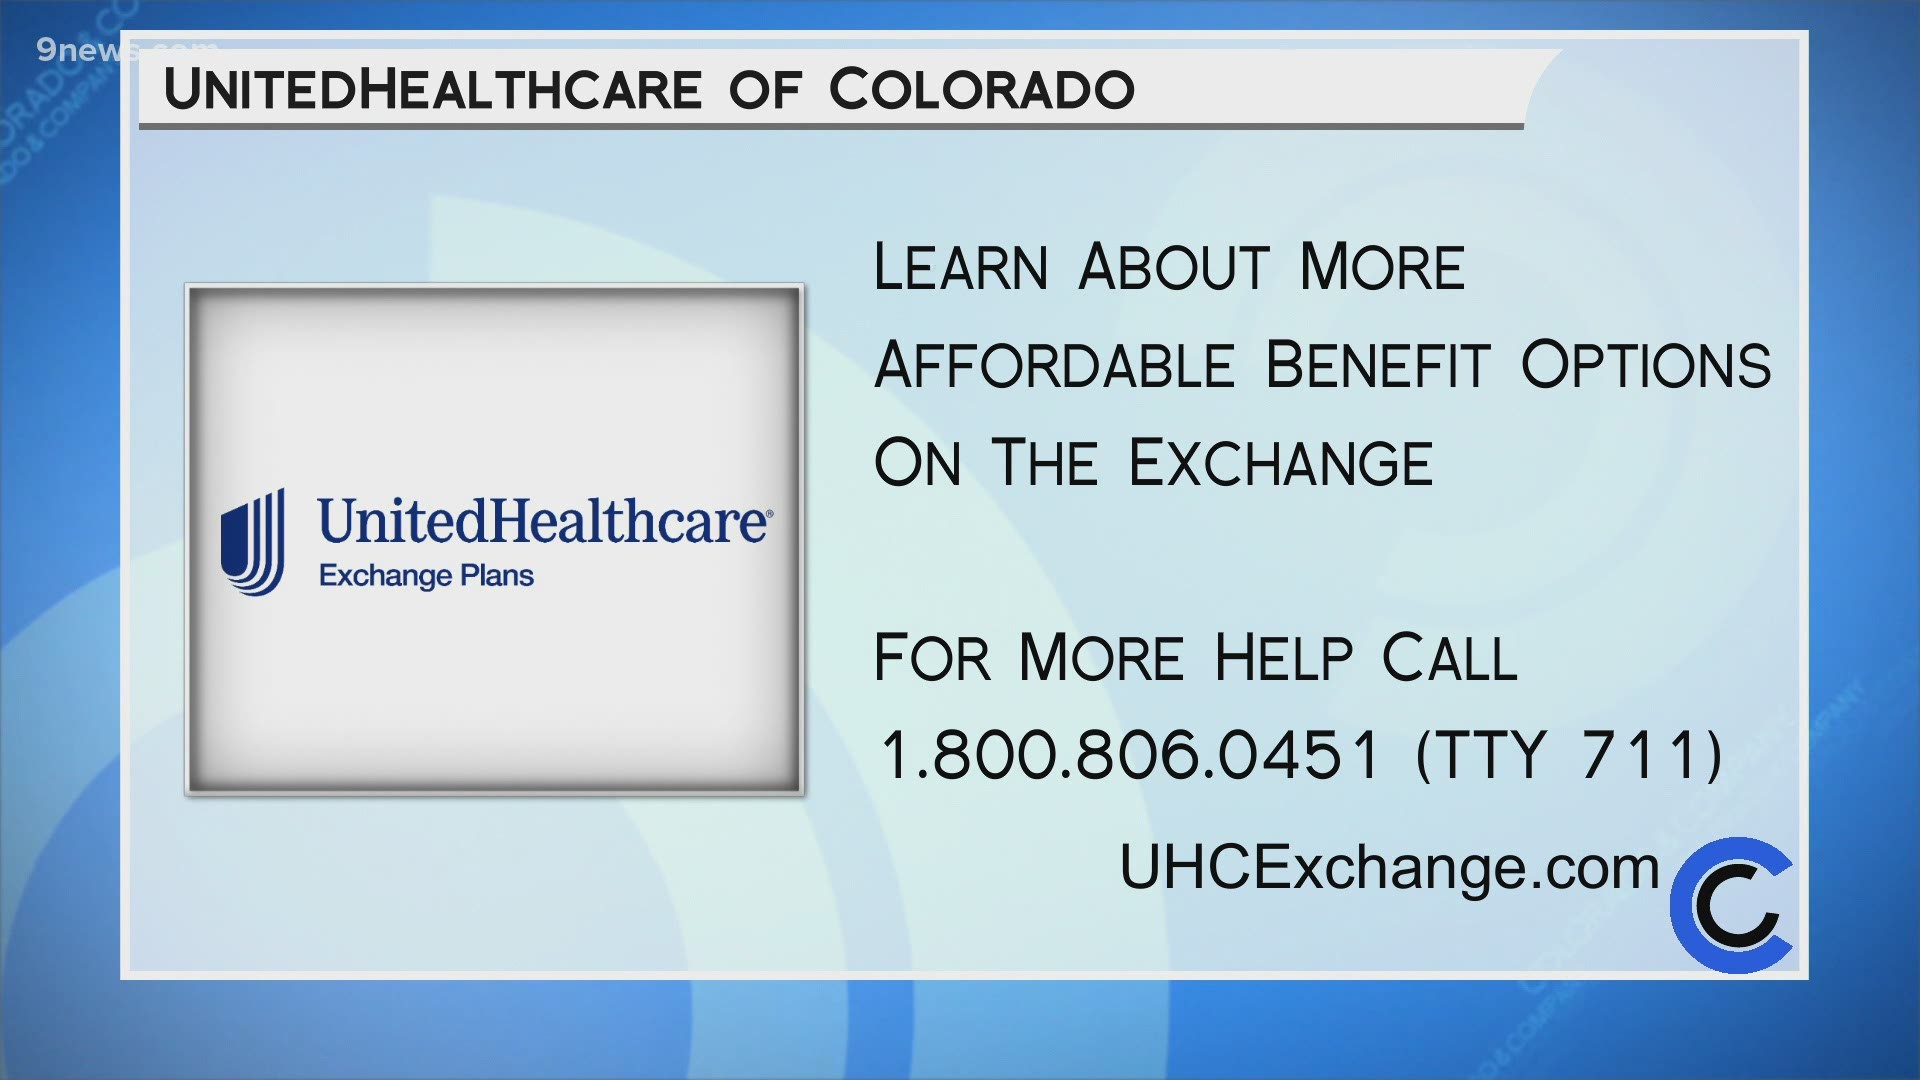 Find the right health plan for you and your budget online at UHCExchange.com or by calling 1.800.806.0451 (TTY 711)